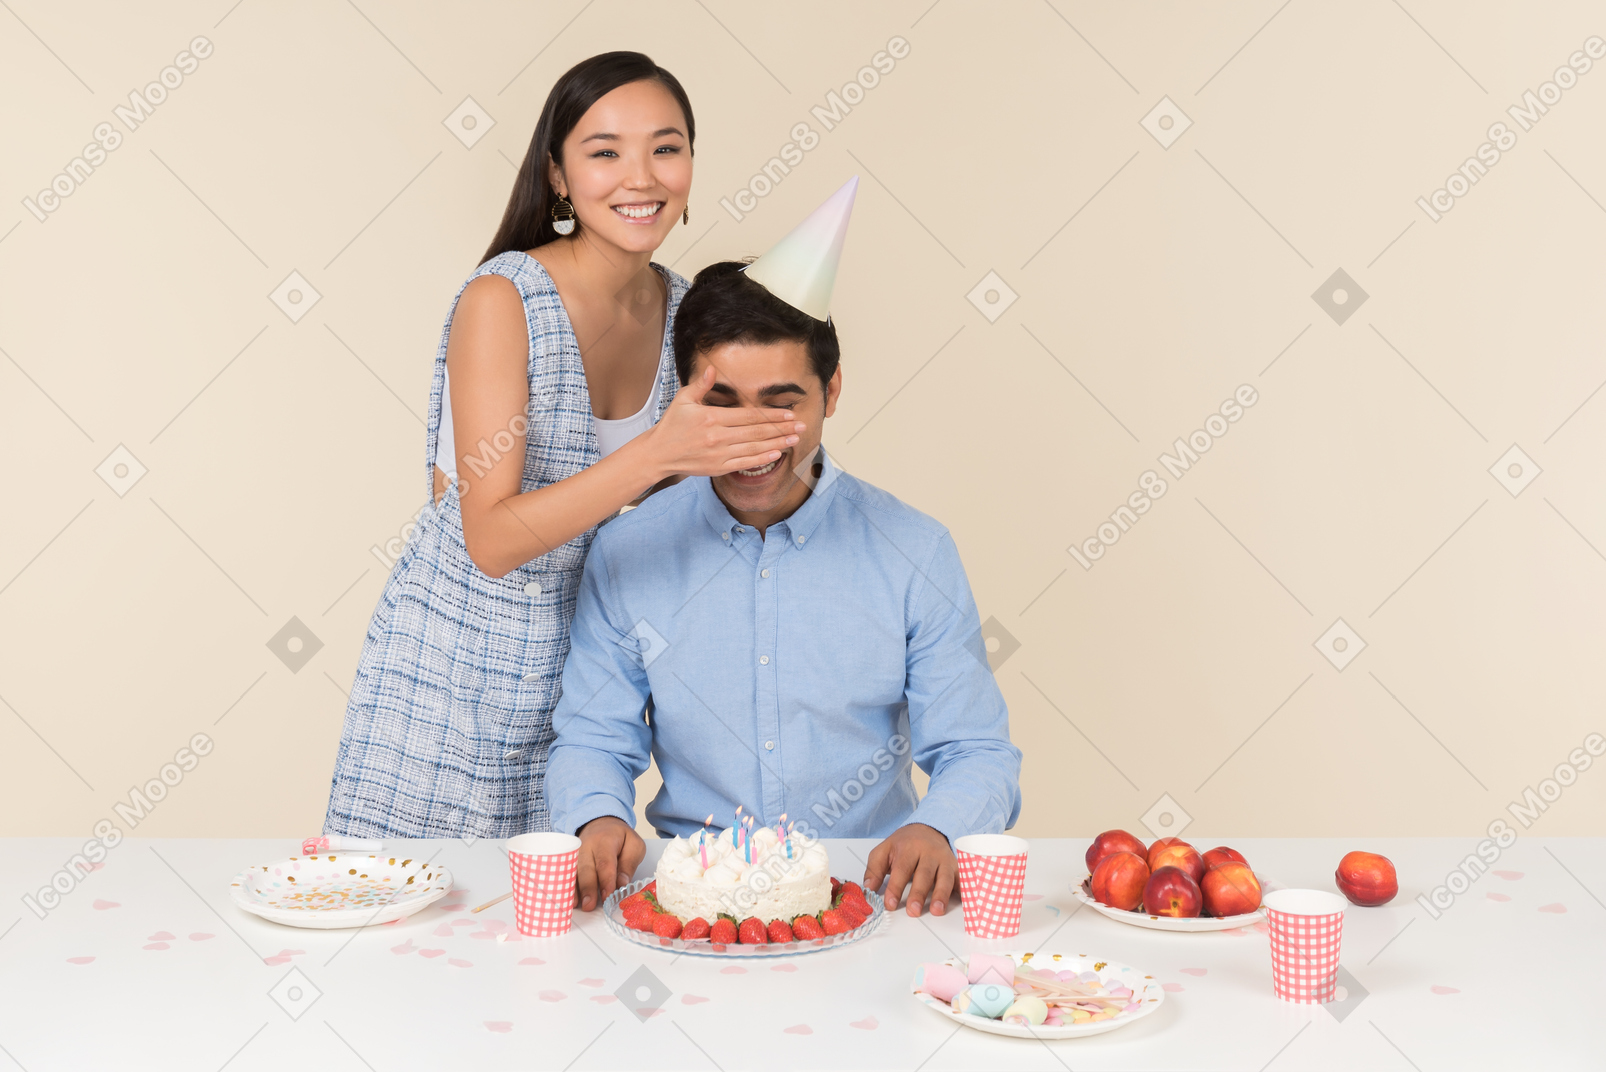 Young asian woman closing eyes to a caucasian guy sitting in front of cake